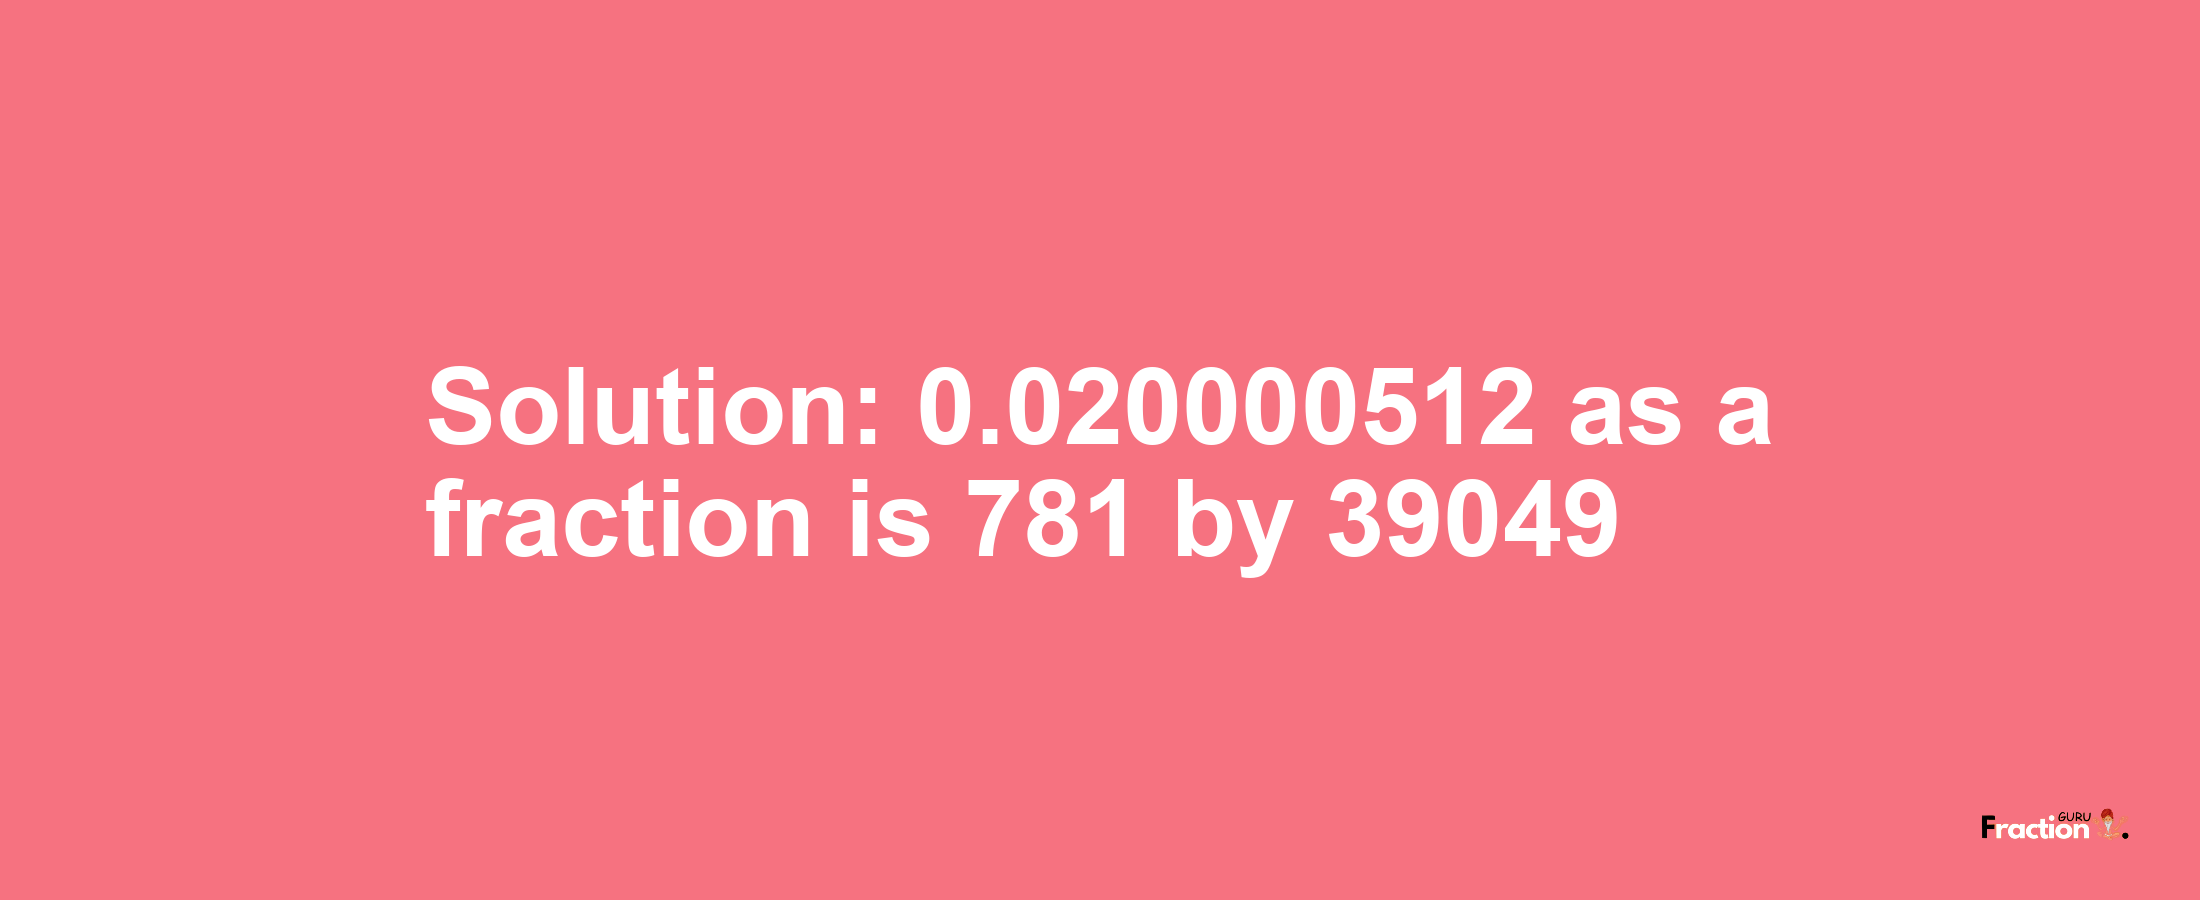 Solution:0.020000512 as a fraction is 781/39049